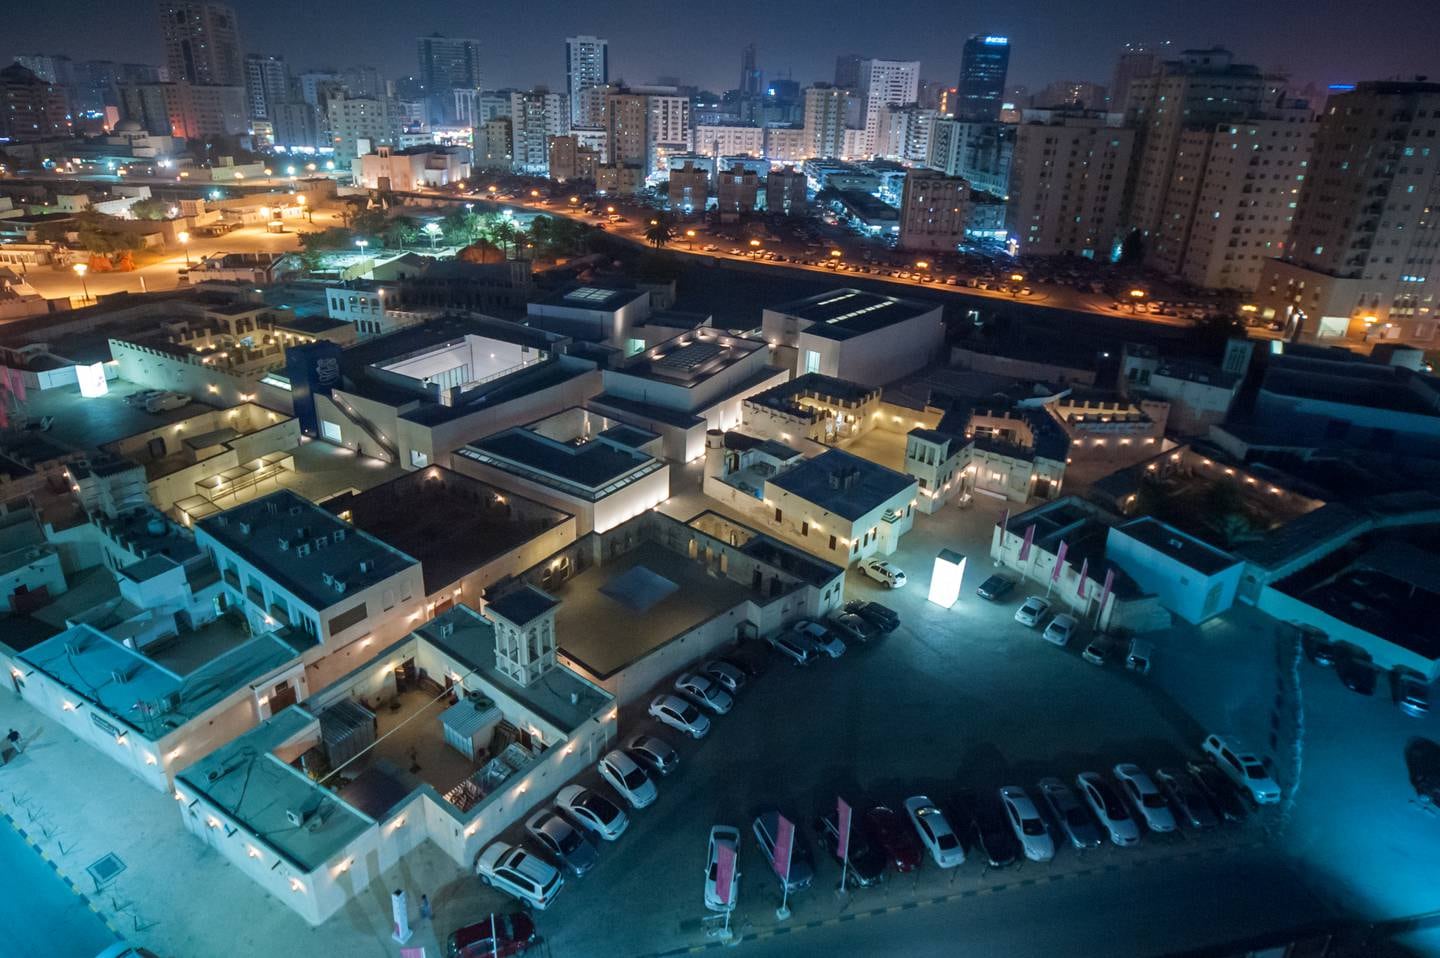 Sharjah Art Foundation is based in the historical quarter of Sharjah, predominantly across Al Mureijah (pictured), Al Shoyoukh and Al Shuwaiheen. Photo: Sharjah Art Foundation